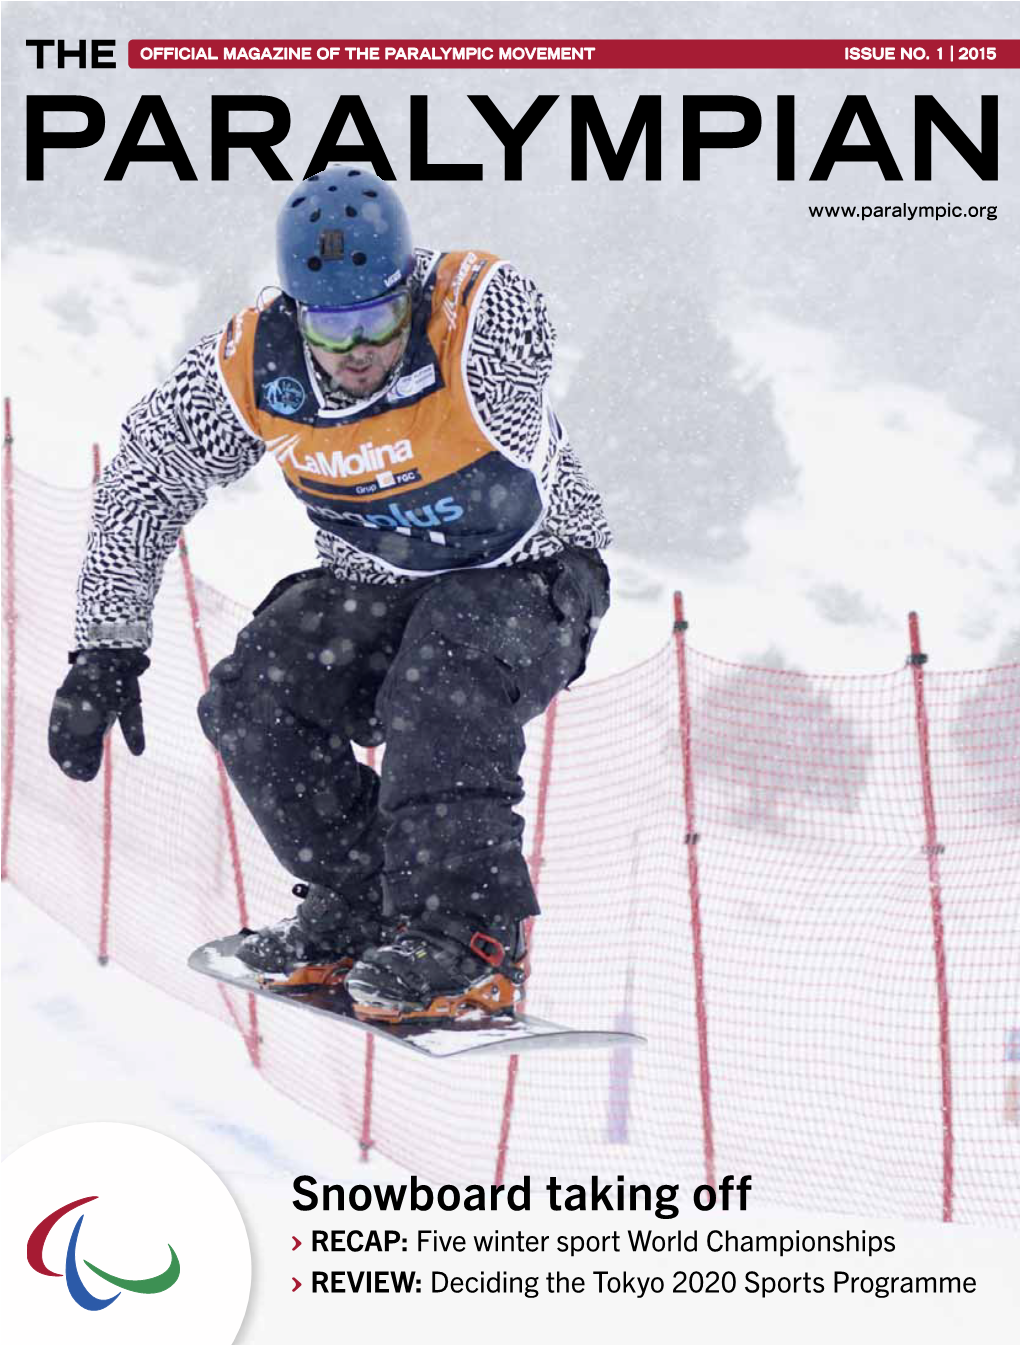 The Paralympian 01|2015 1 Official Magazine of the Paralympic Movement Issue No